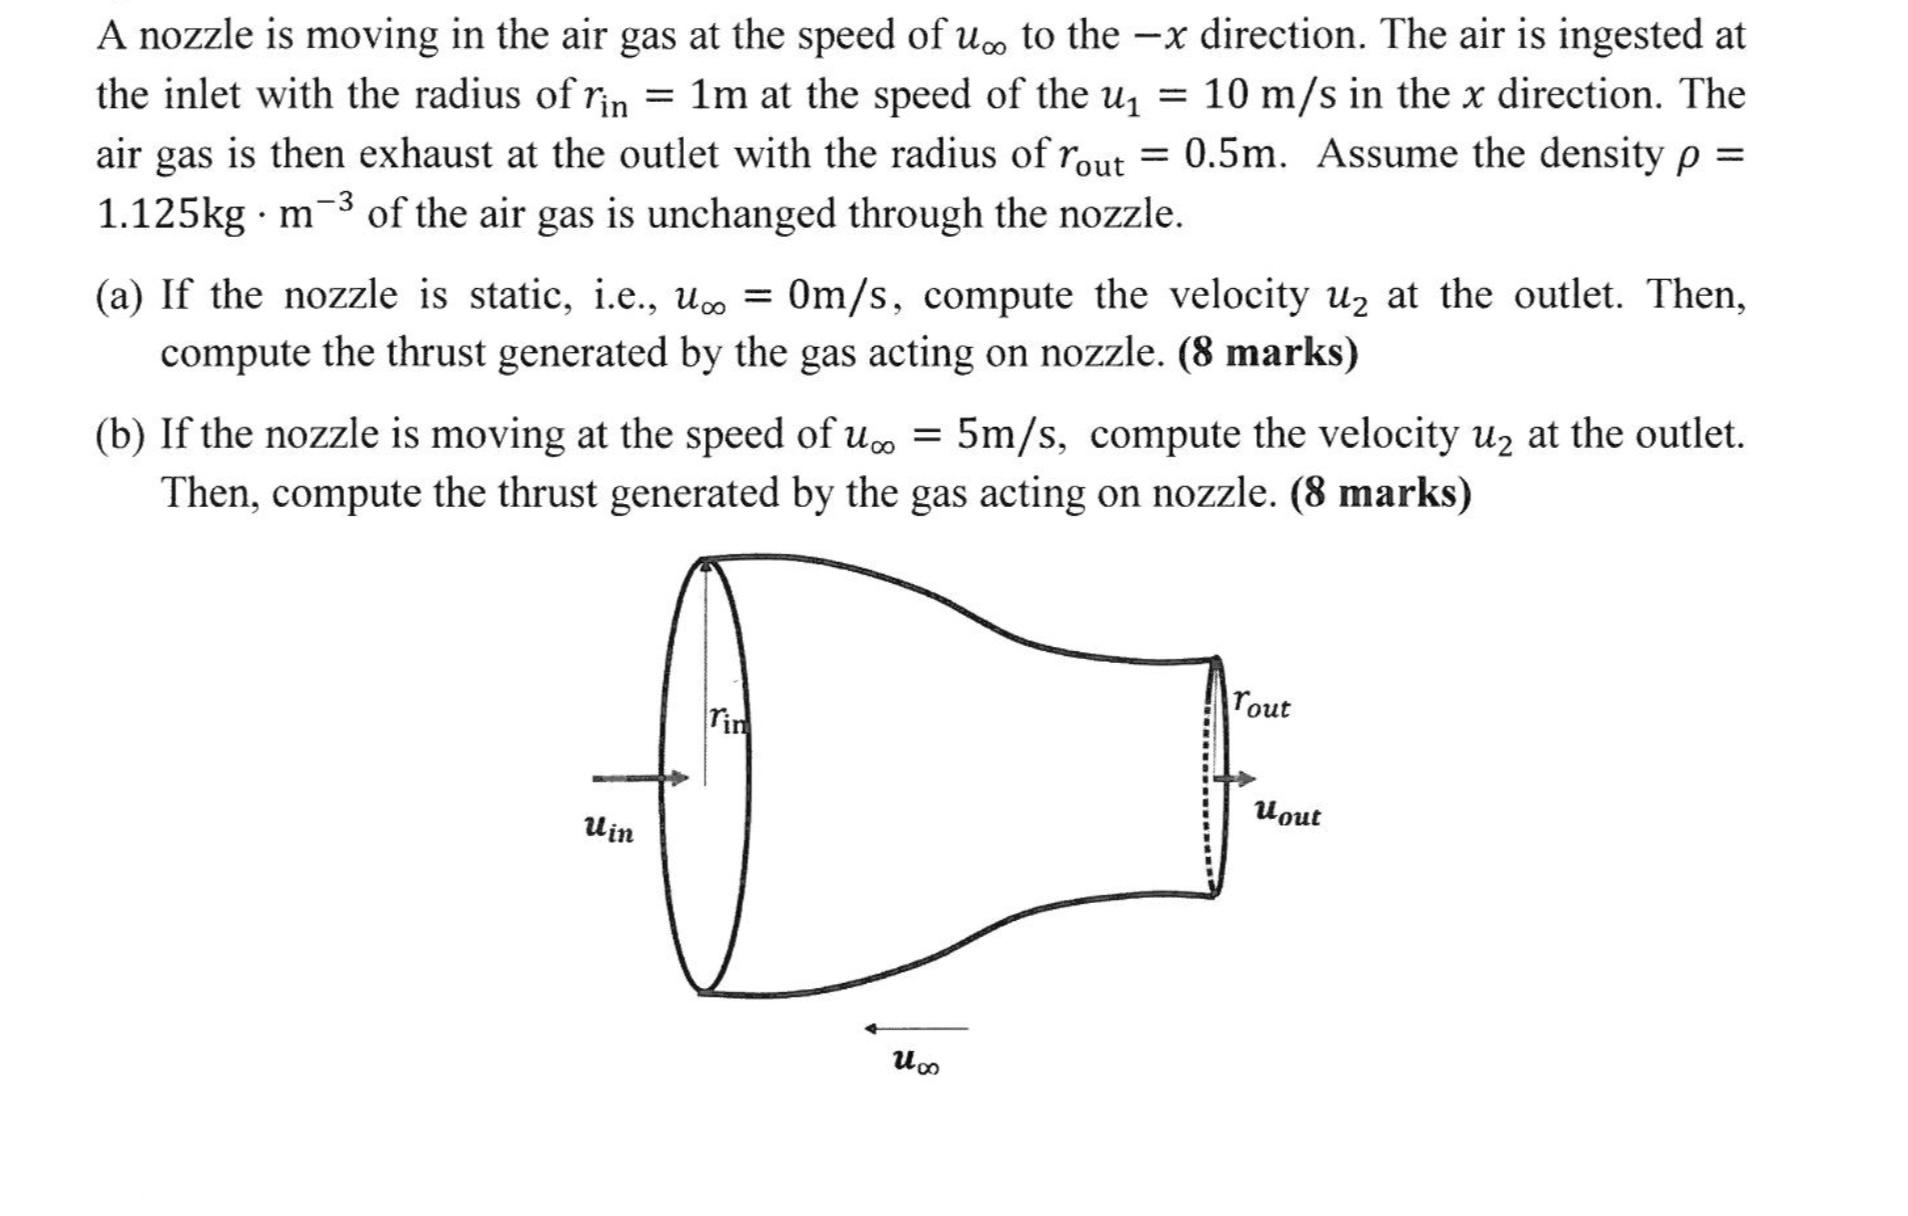 A nozzle is moving in the air gas at the speed of u to the -x direction. The air is ingested at the inlet